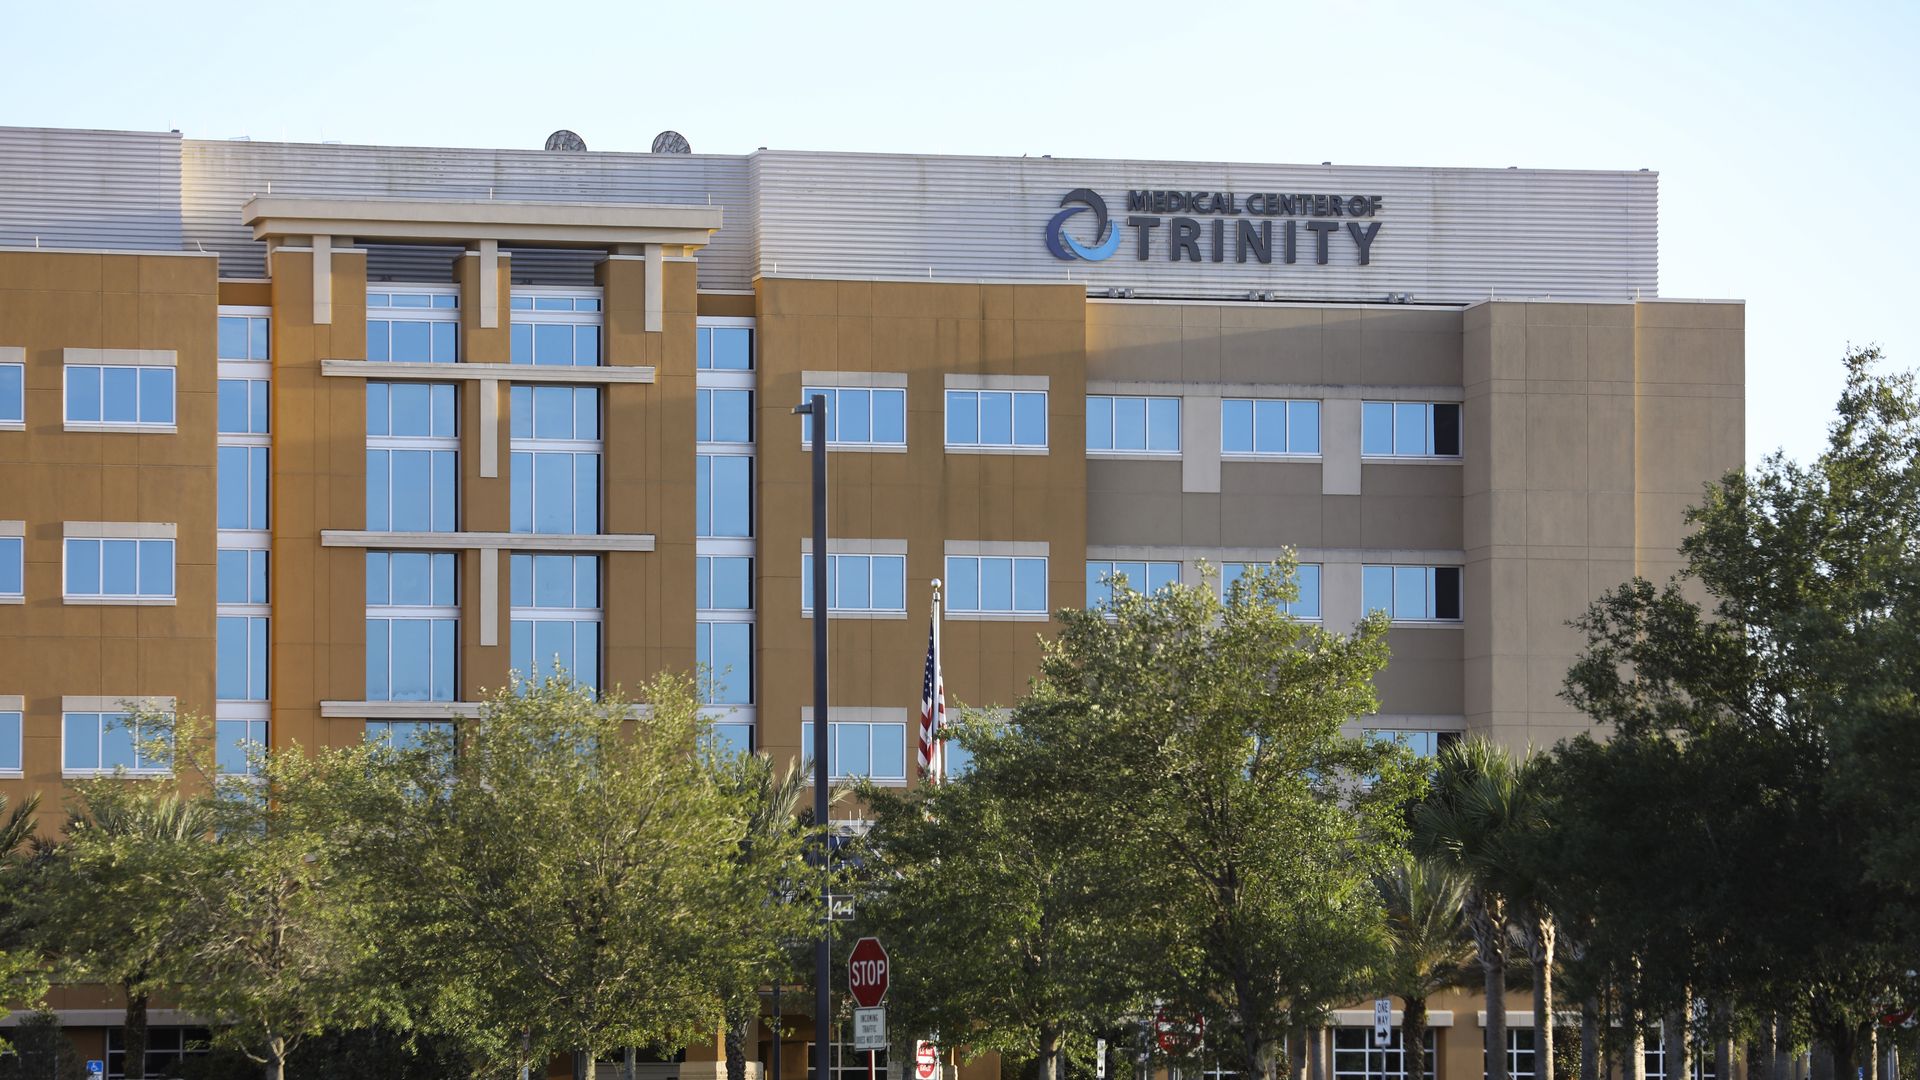 A beige hospital with the sign "Medical Center of Trinity" on top, and trees in the foreground.